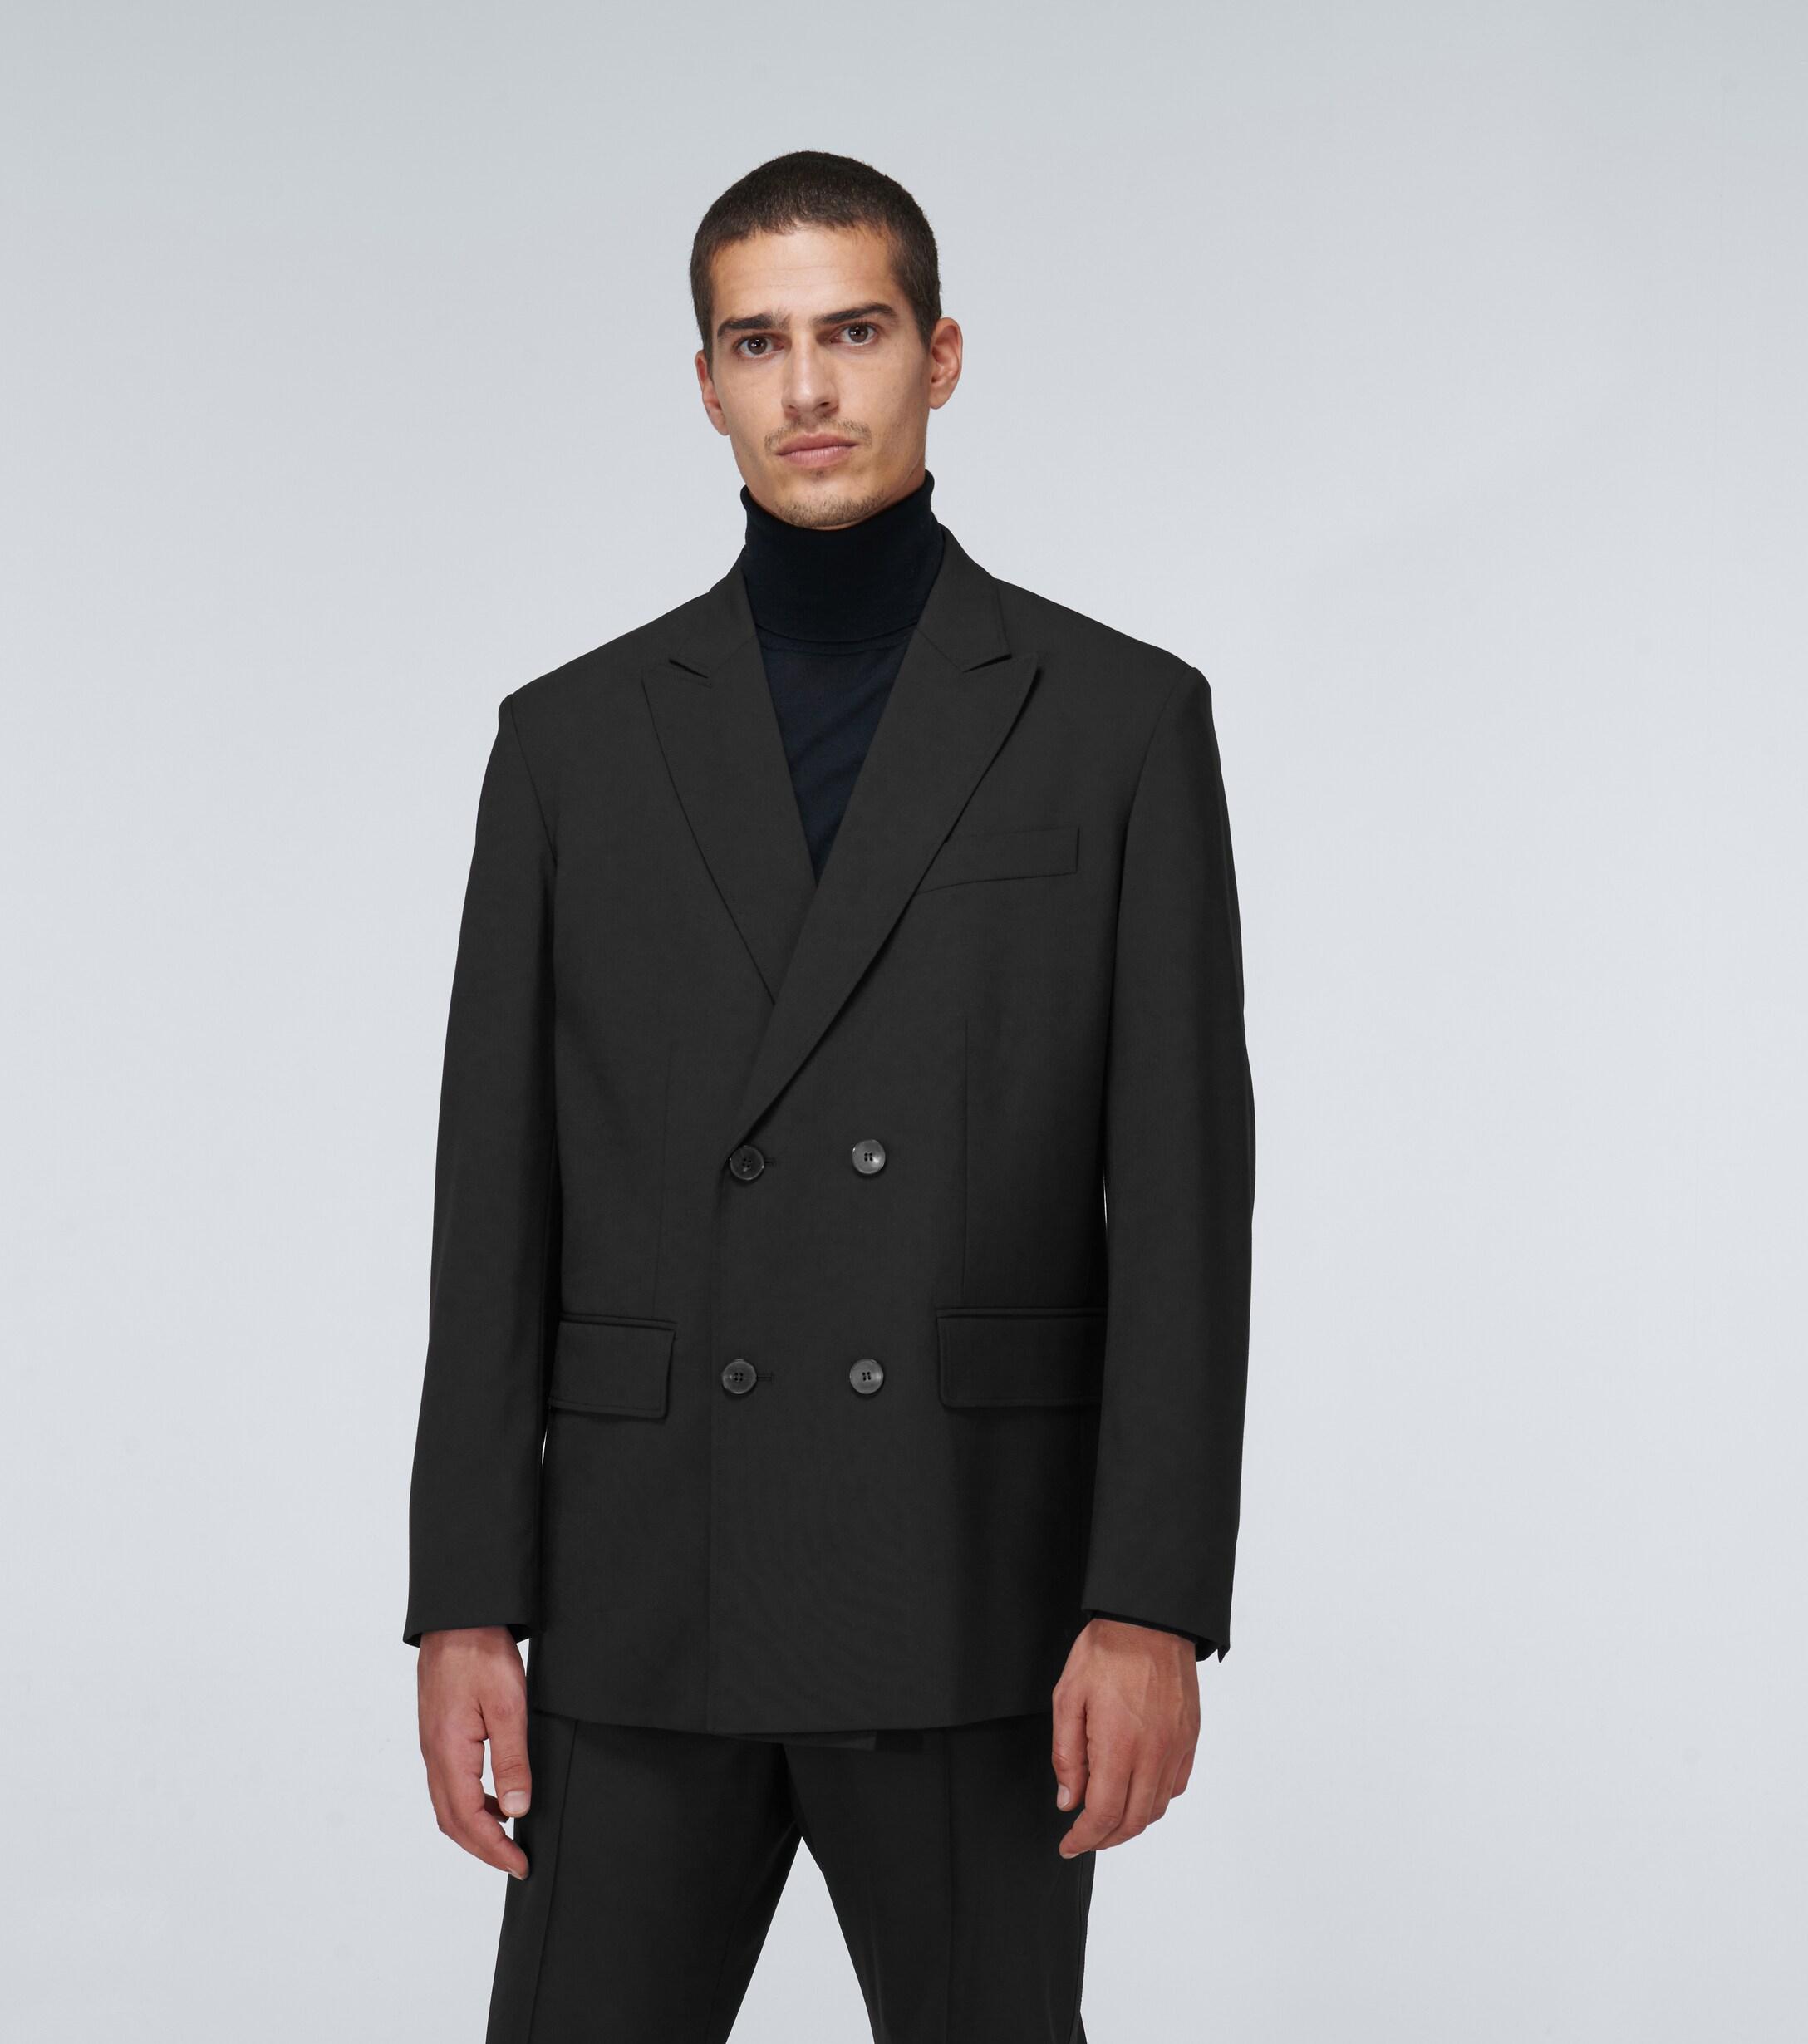 Valentino Double-breasted Wool-blend Blazer in Black for Men - Lyst